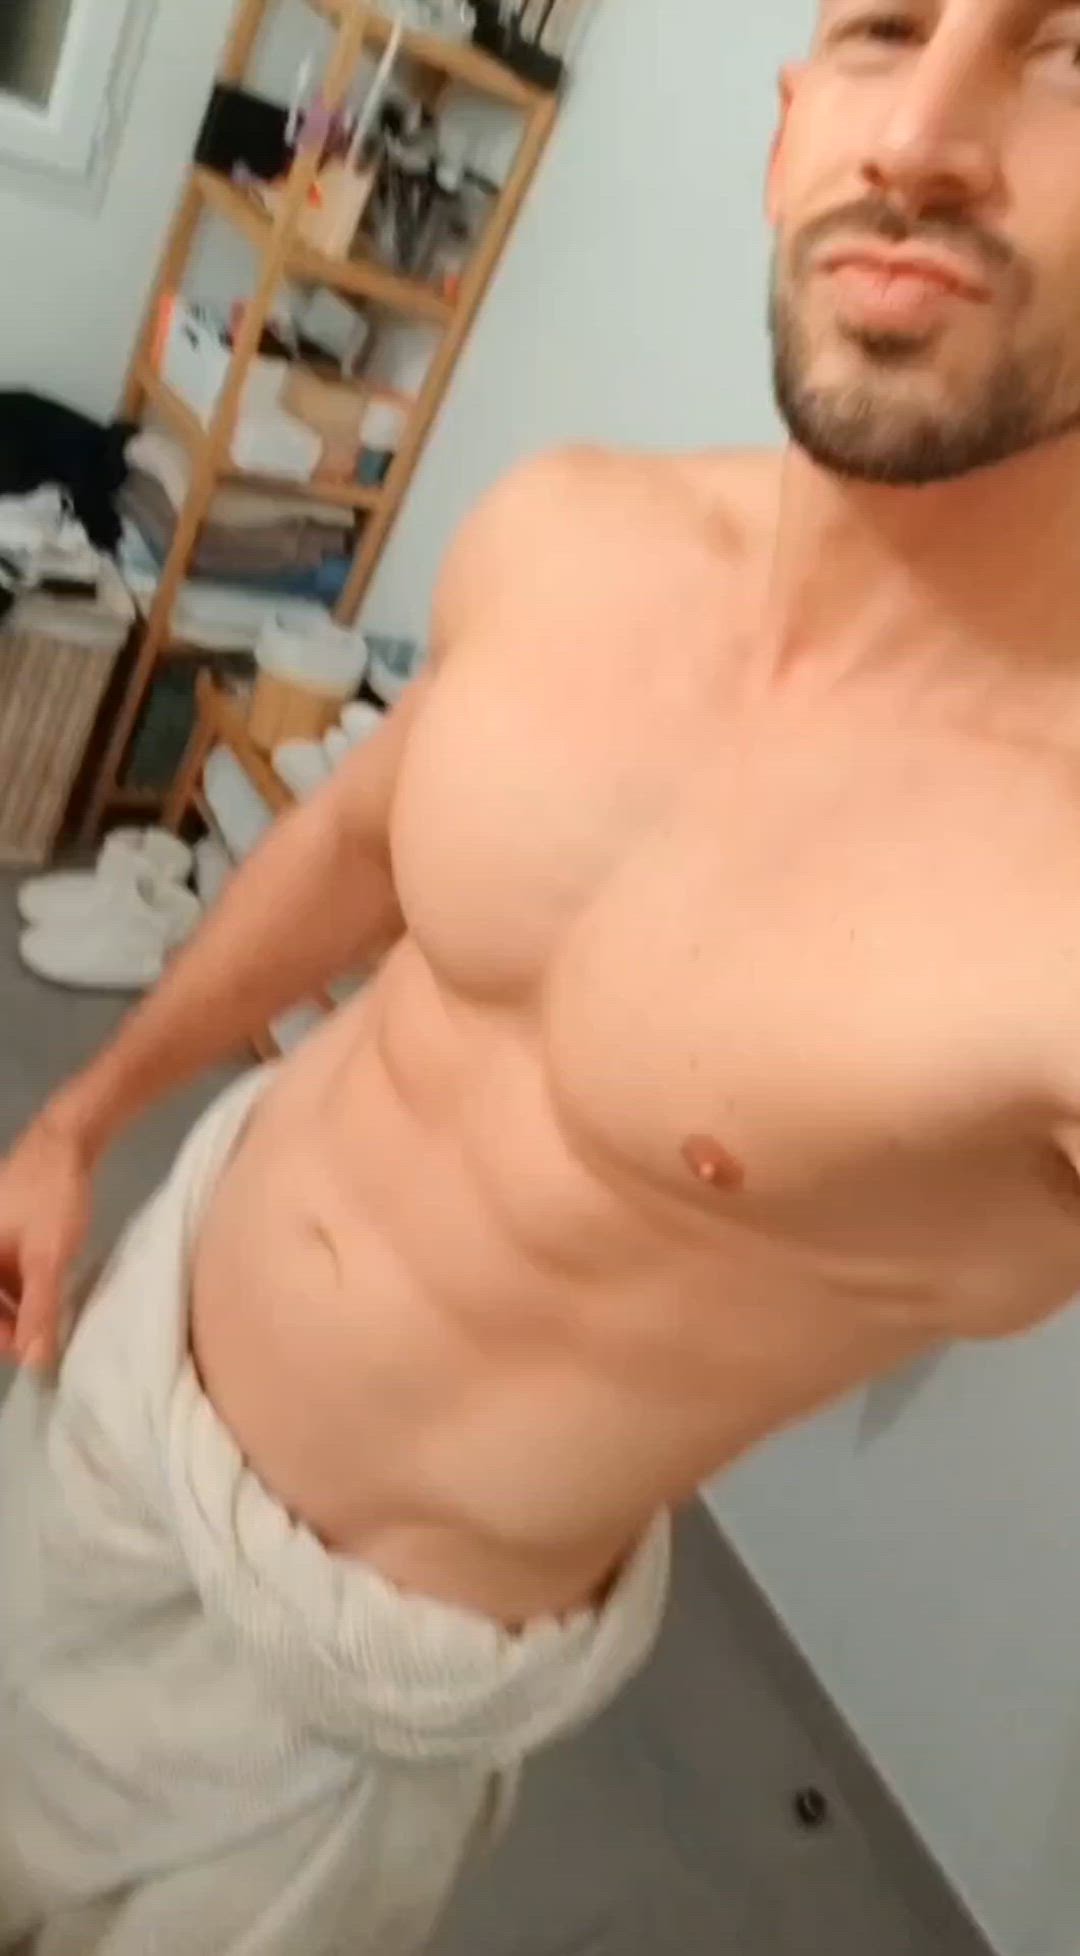 Undressing porn video with onlyfans model benjoyoff <strong>@benjoyoff</strong>